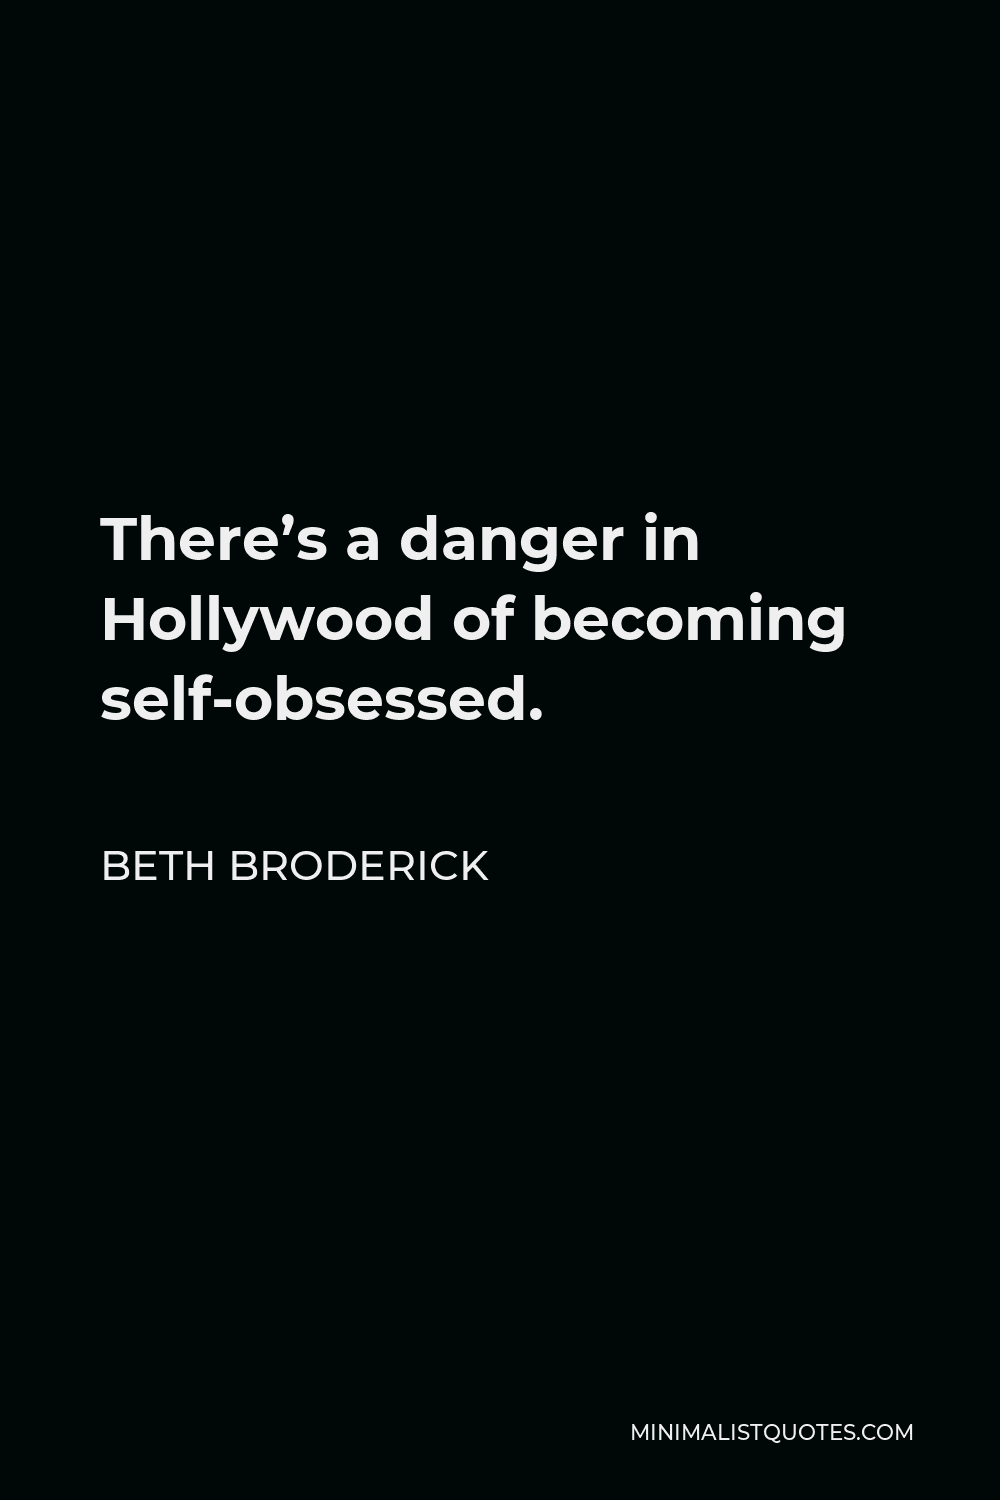 Beth Broderick Quote - There’s a danger in Hollywood of becoming self-obsessed.